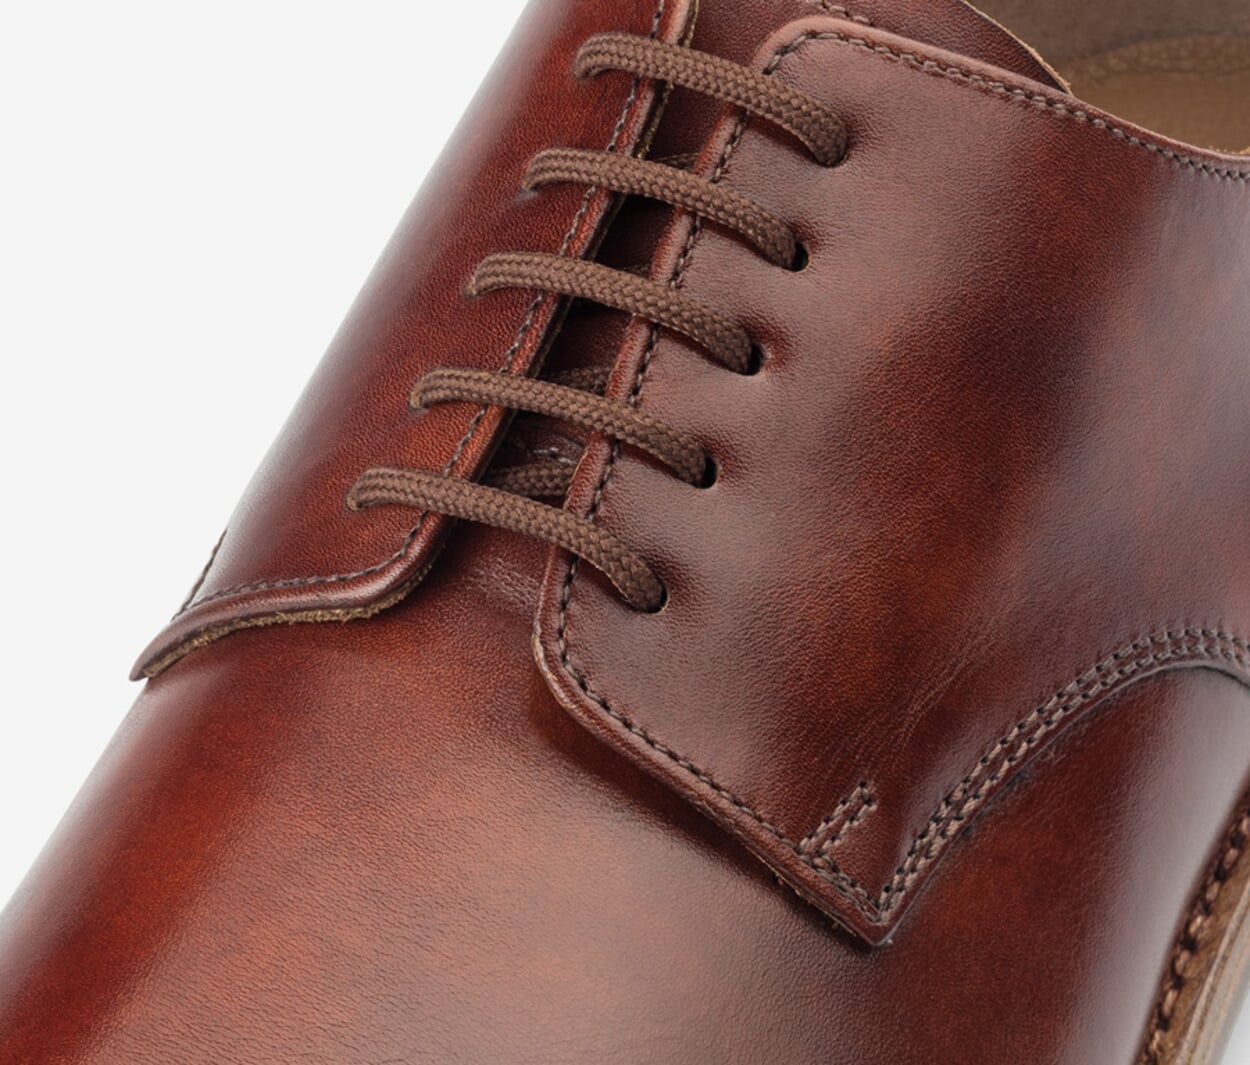 Smooth leather